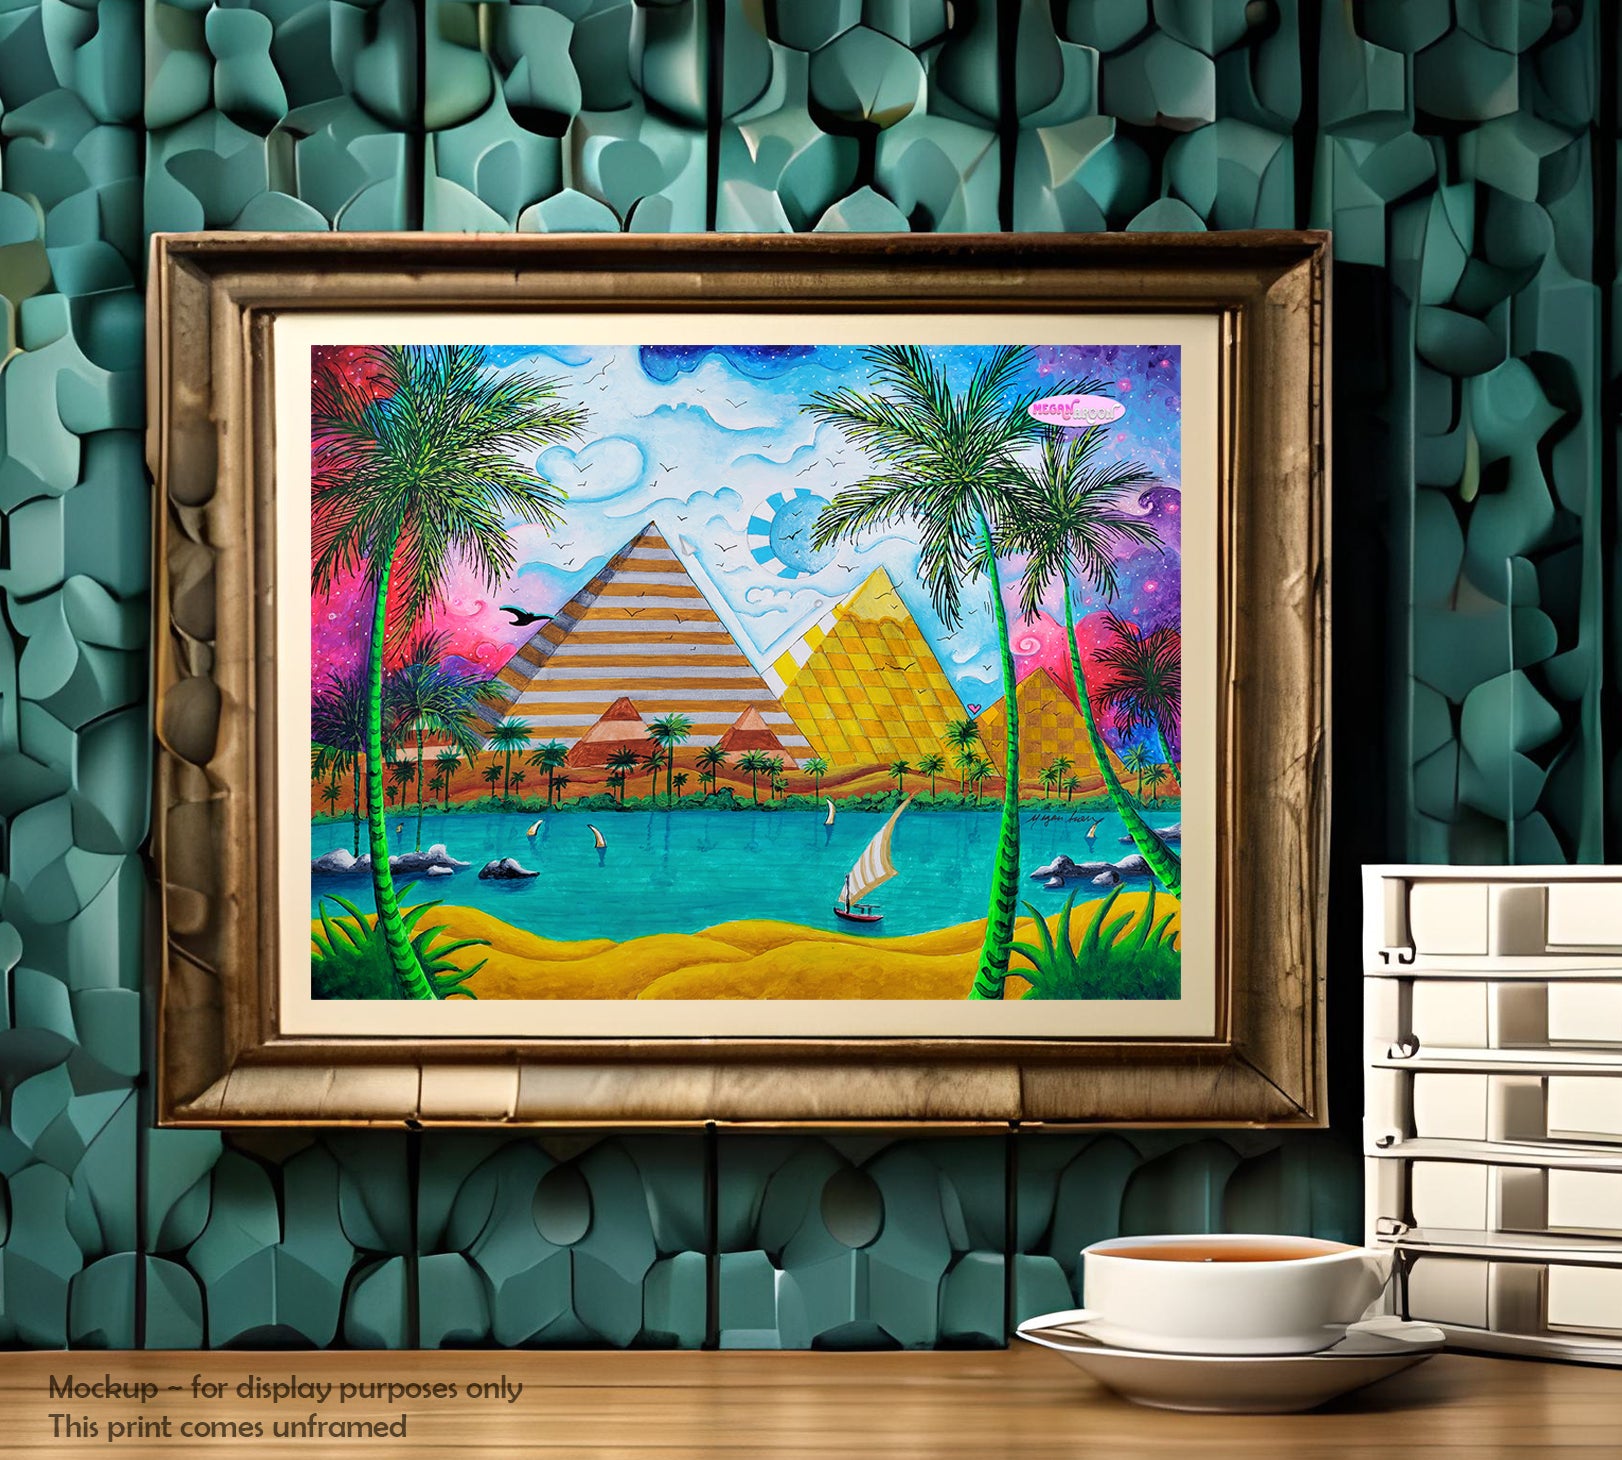 ornate brown frame white mat room setting of pyramids of giza travel poster print from original whimsical colorful pop art style painting by traveling artist meganaroon